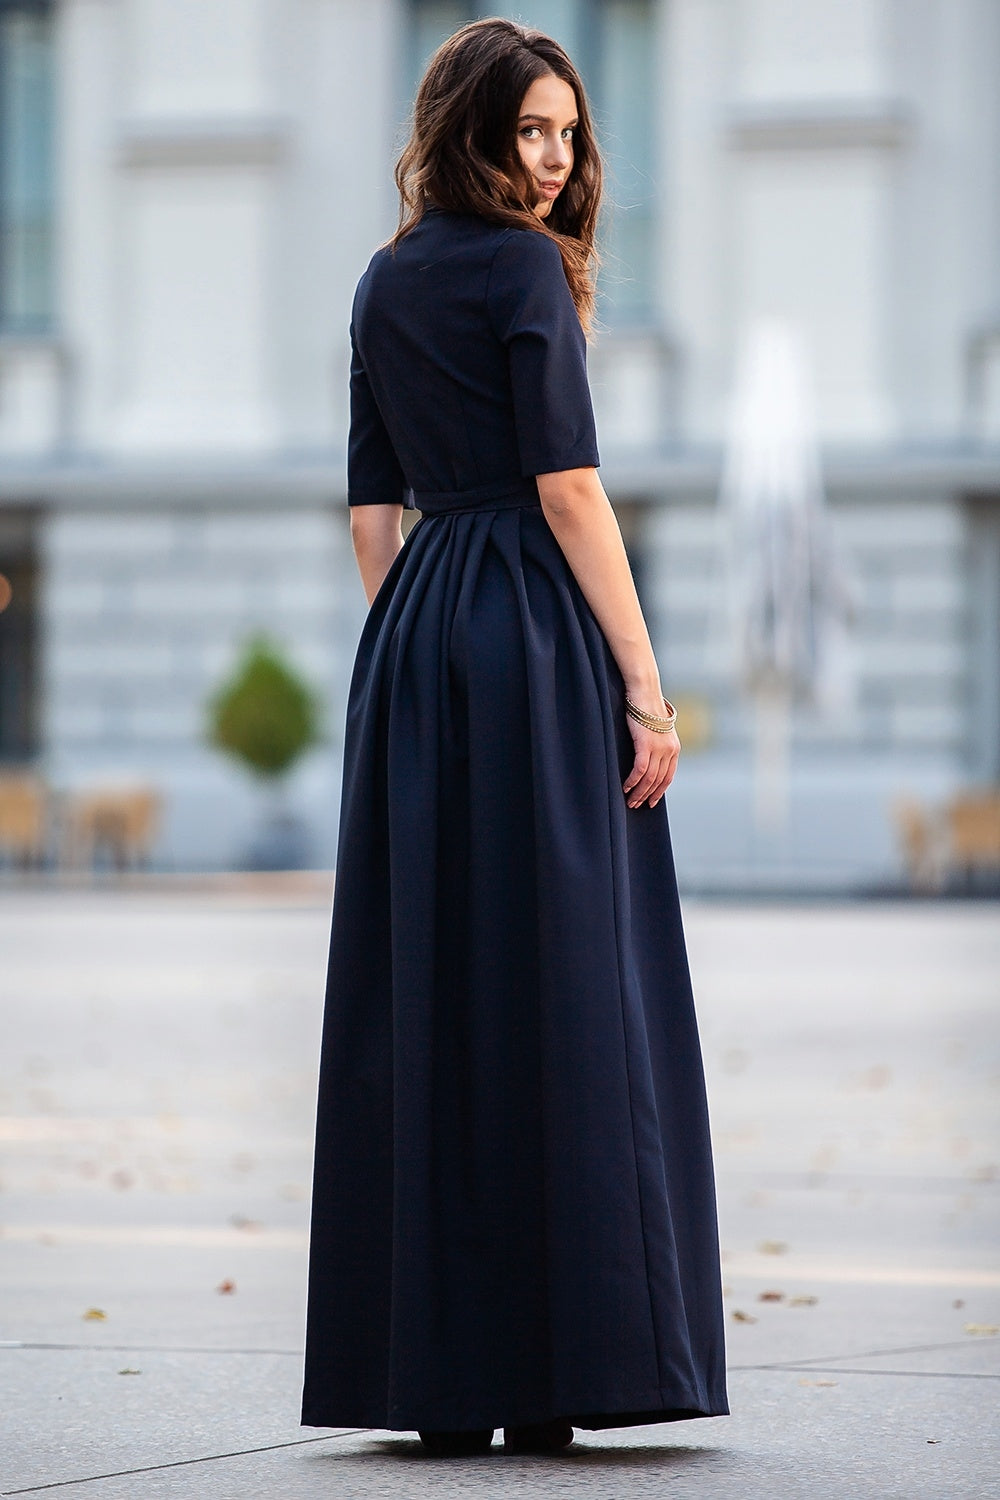 Black classic maxi dress with pleats and separated belt